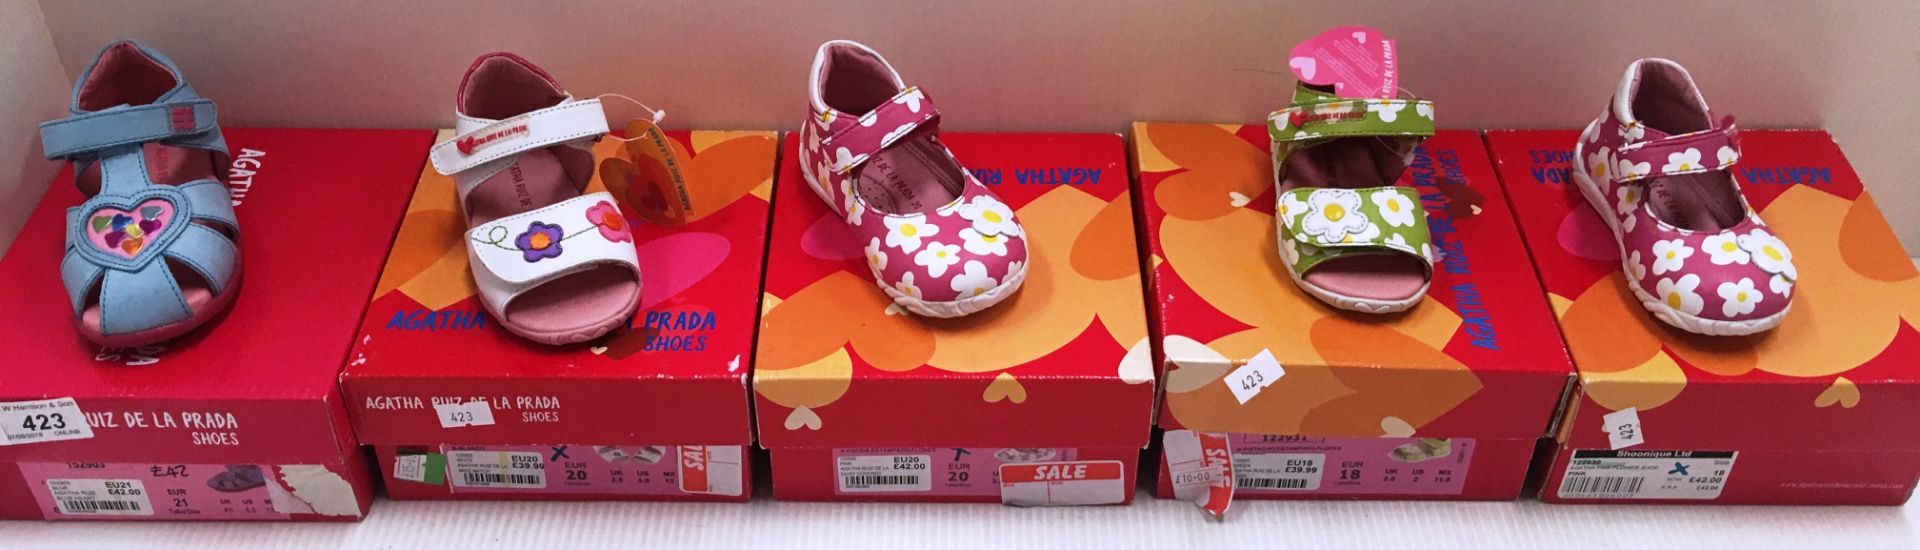 5 x pairs of children's shoes and sandal